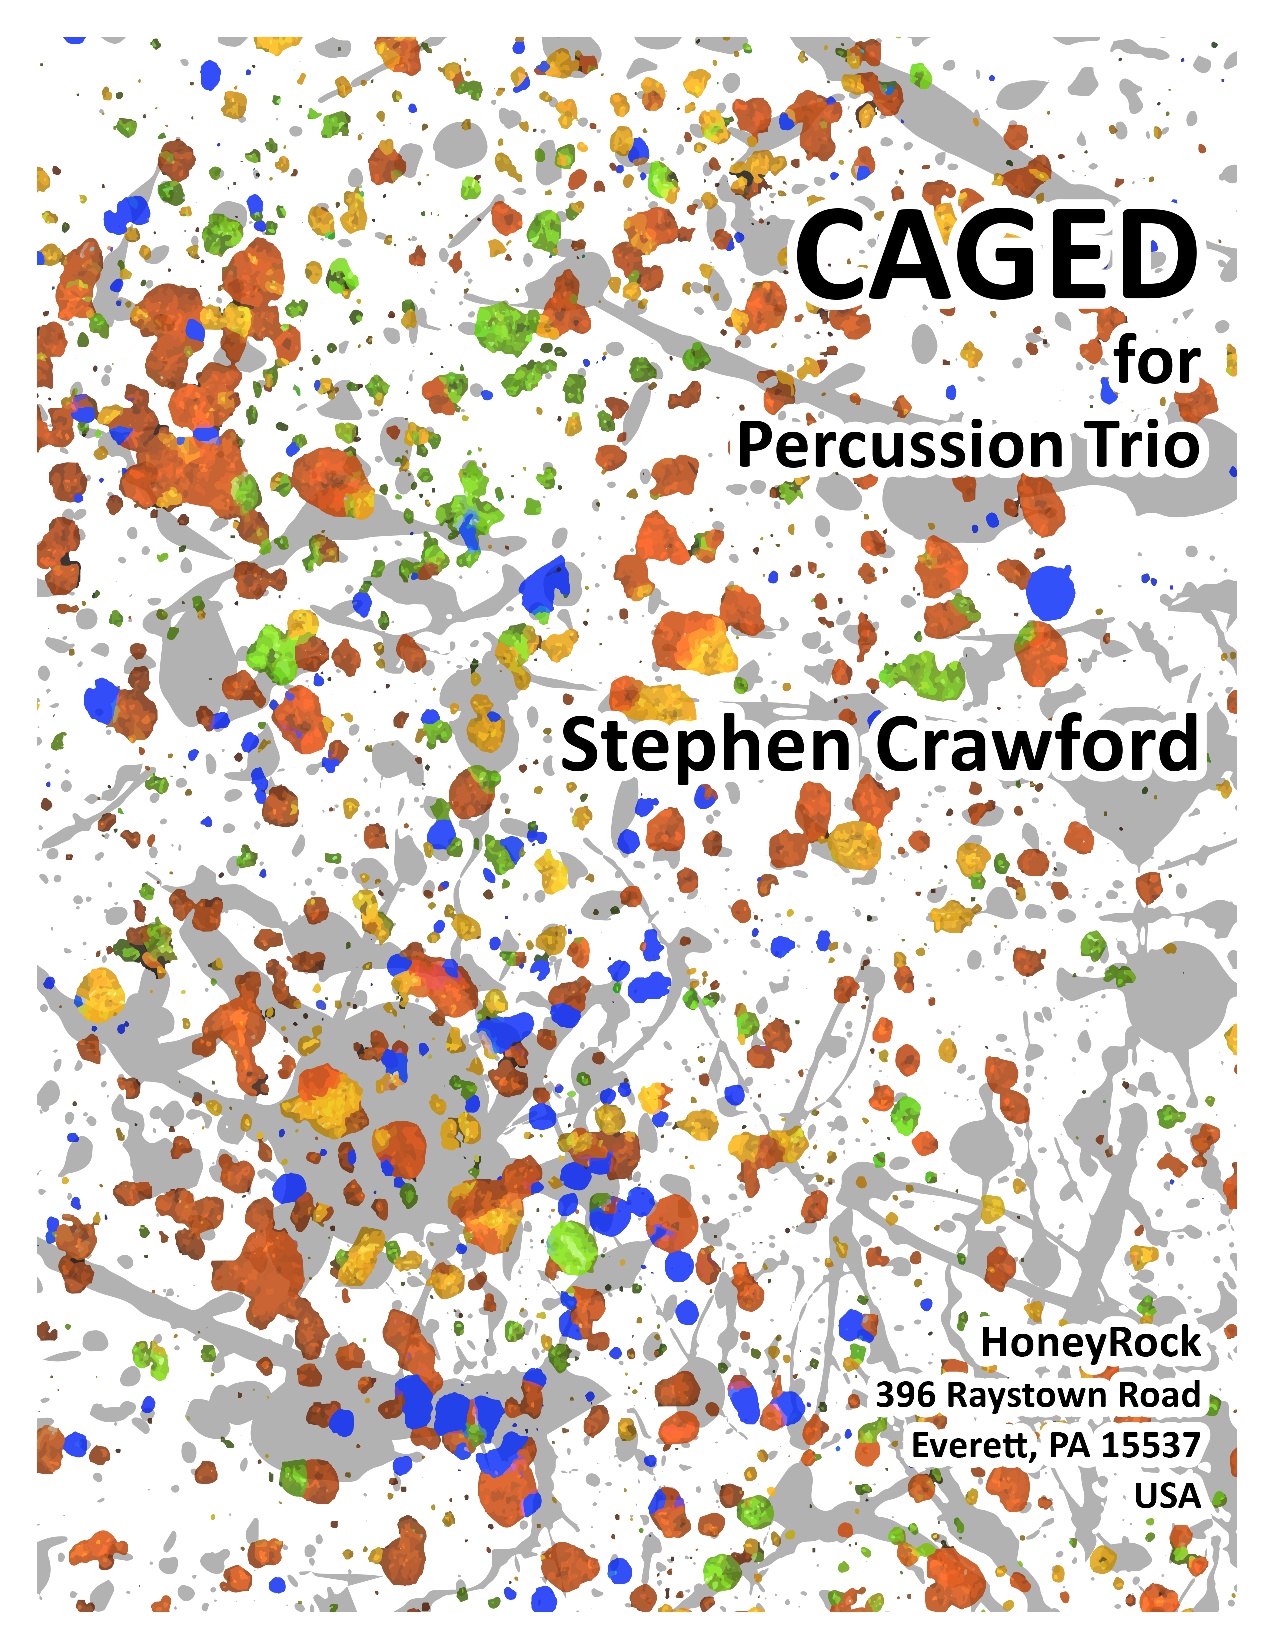 CAGED for Percussion Trio, Stephen Crawford